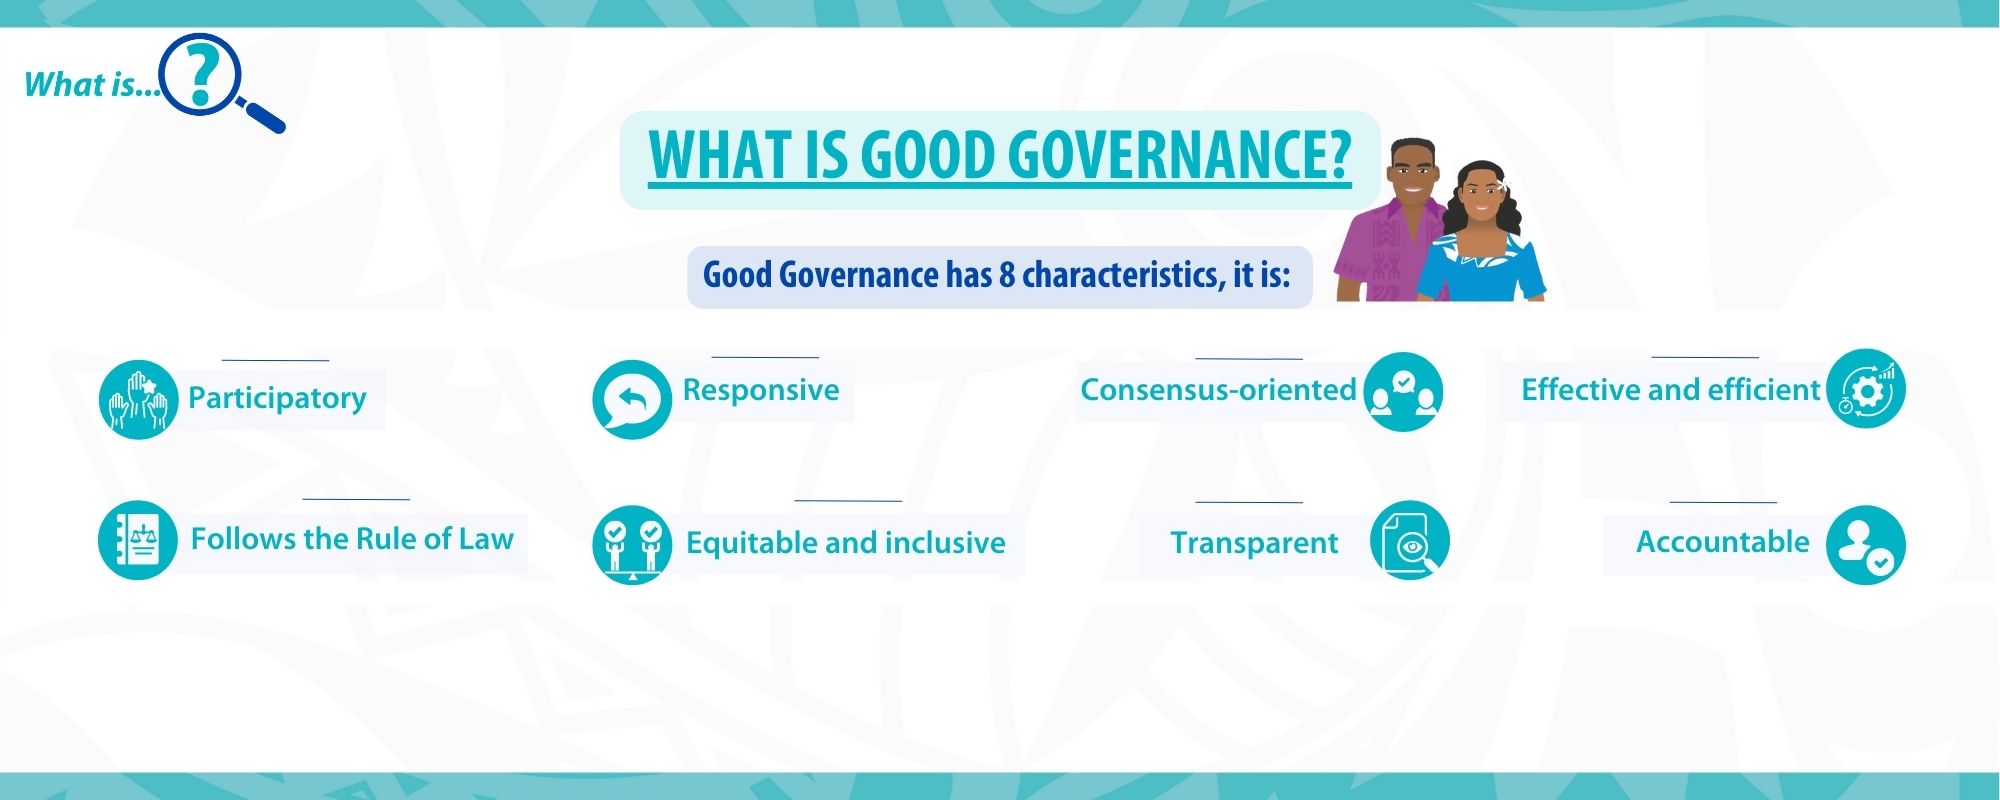 OPEN DATA AND GOOD GOVERNANCE